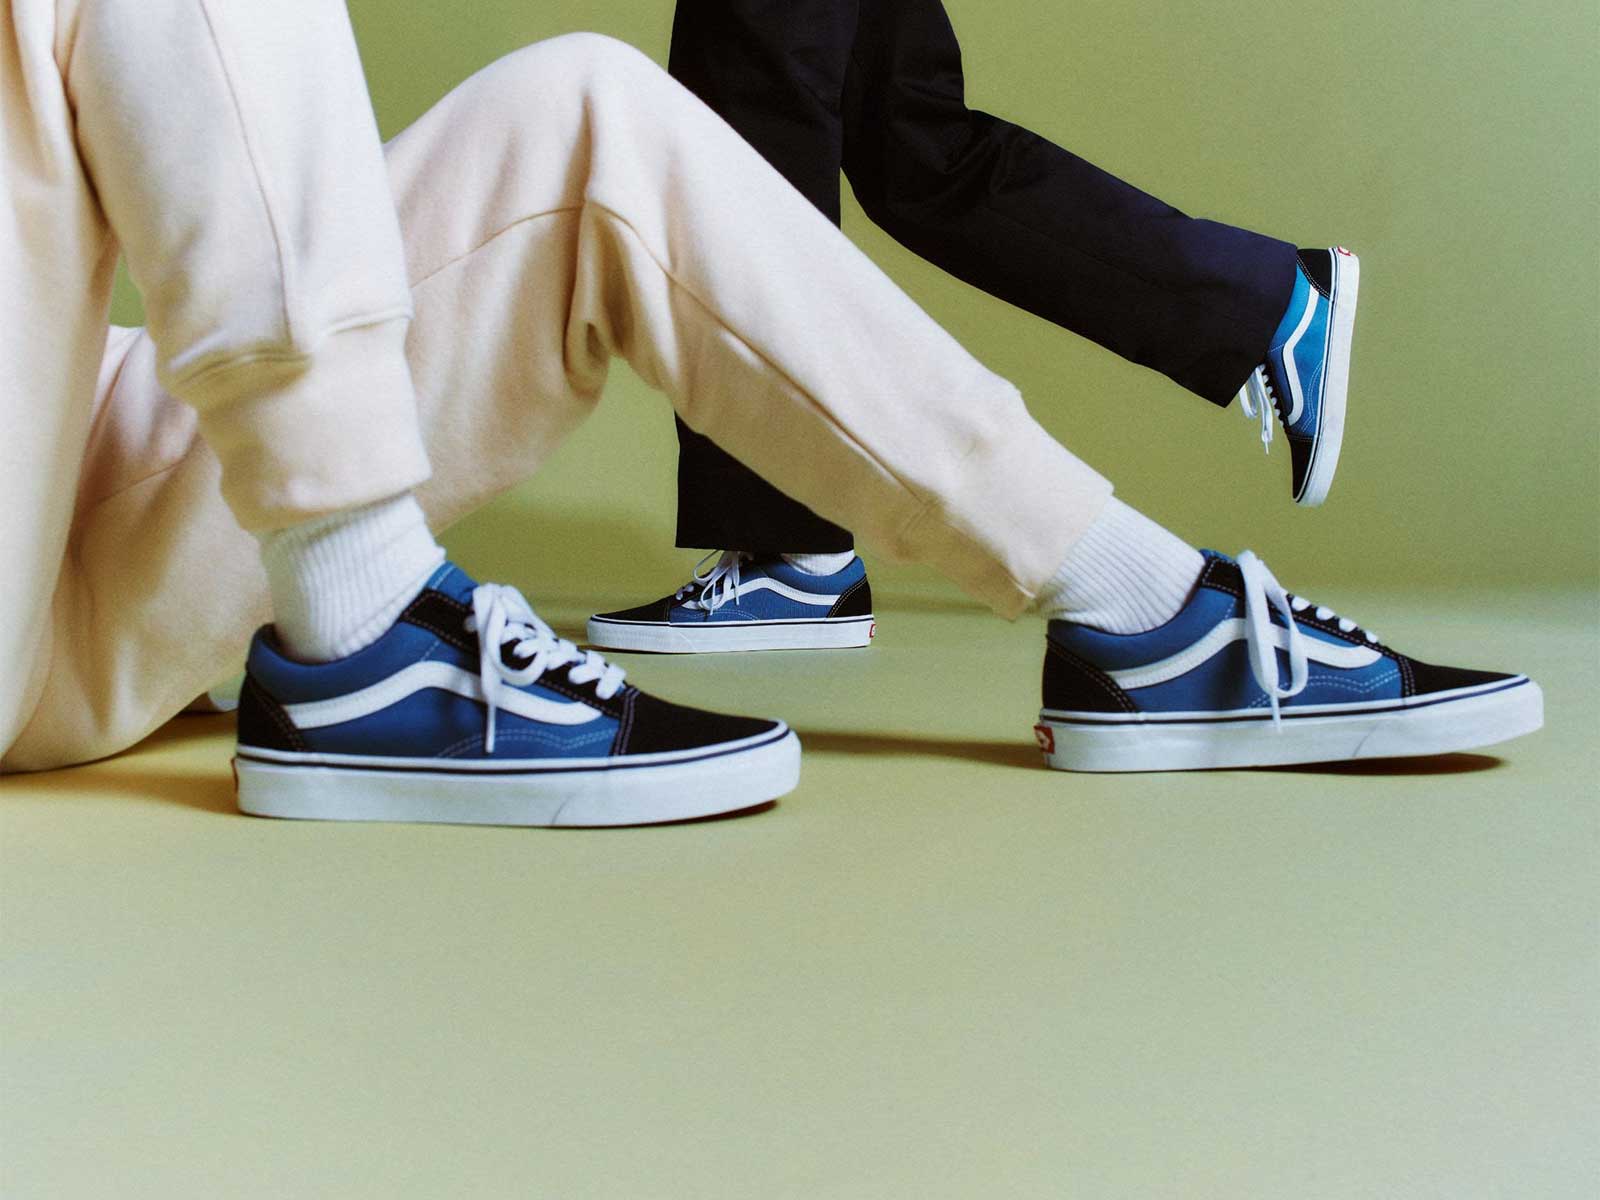 Vans Old Skool, the iconic silhouette that reigns supreme in street style  and pop culture